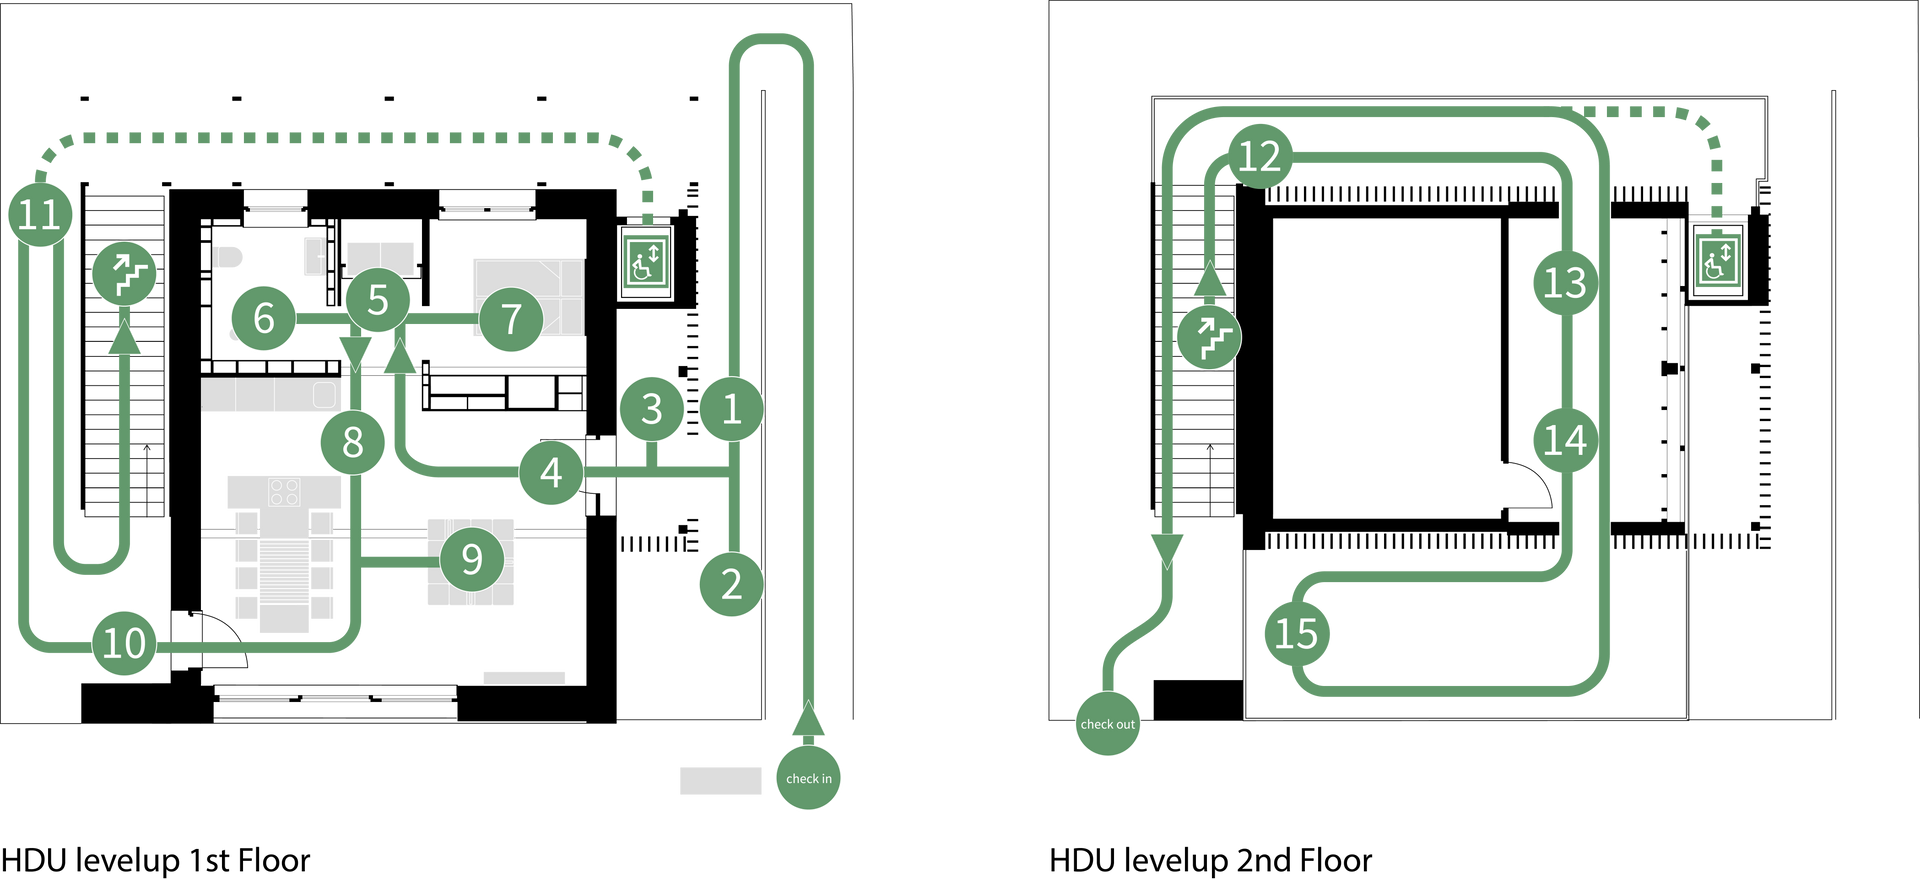 Floor plan of our House Demonstration Unit with the stations of the public tour